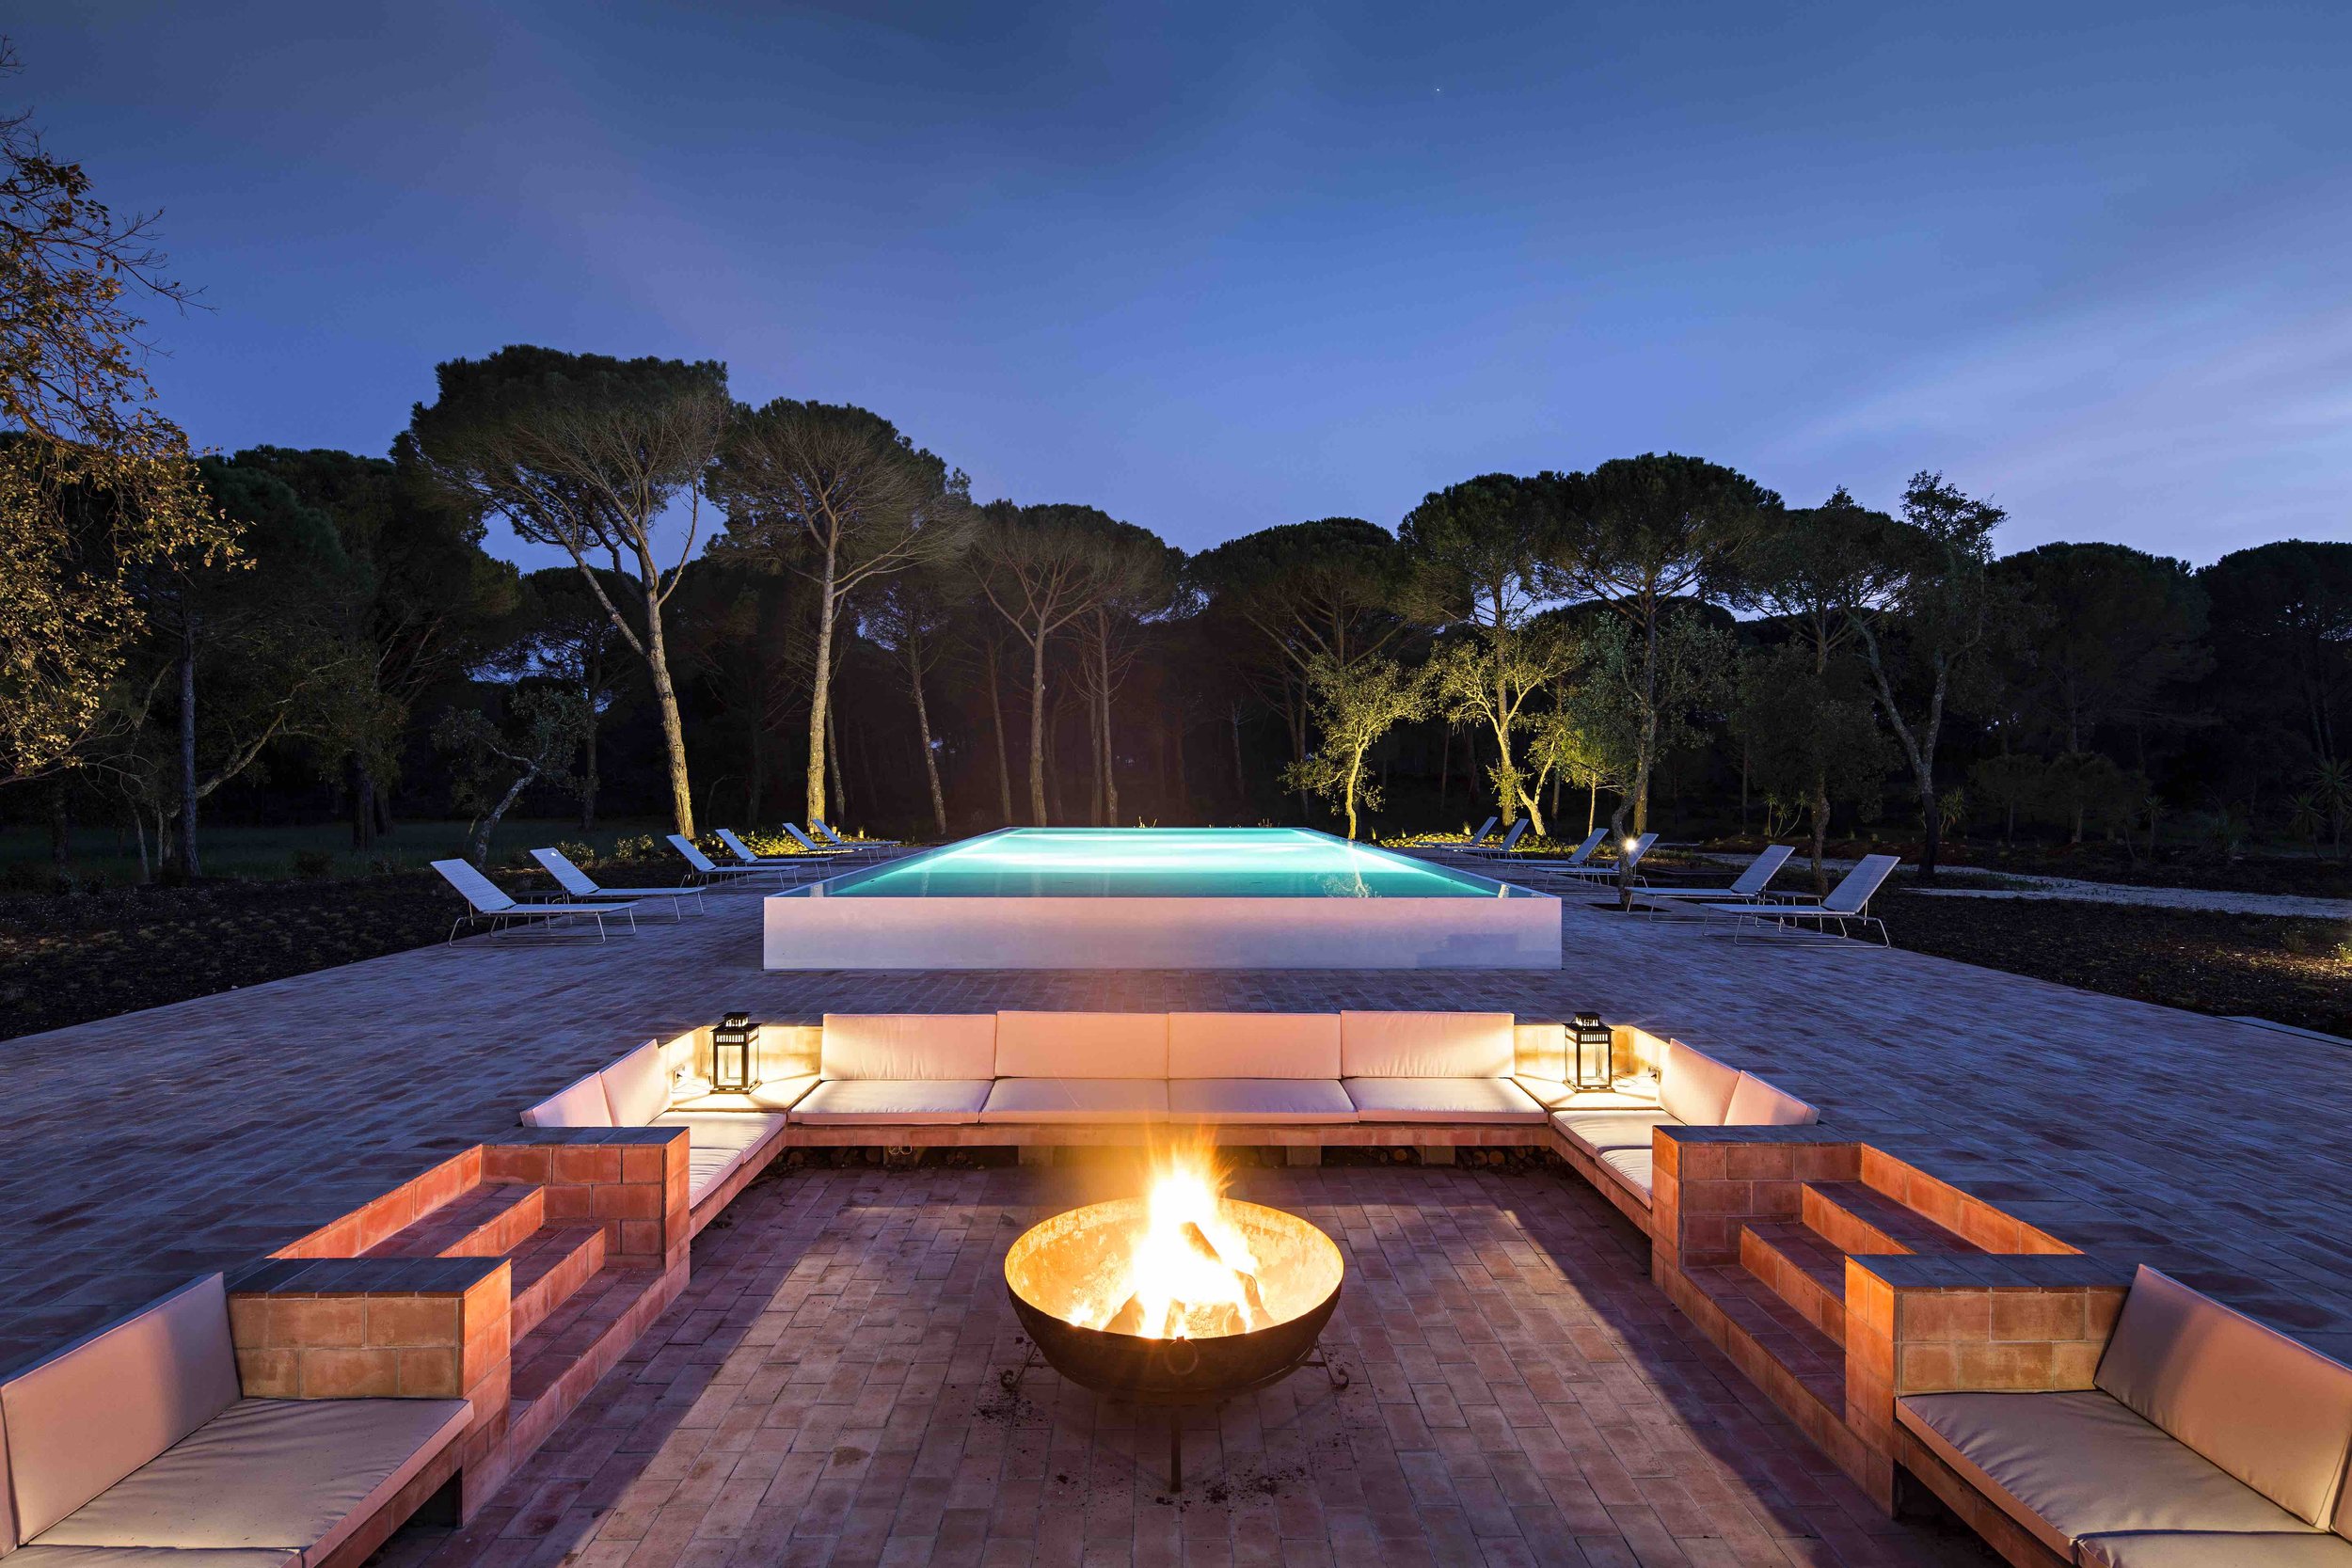 Firepit and Pool Sublime Comporta.jpg